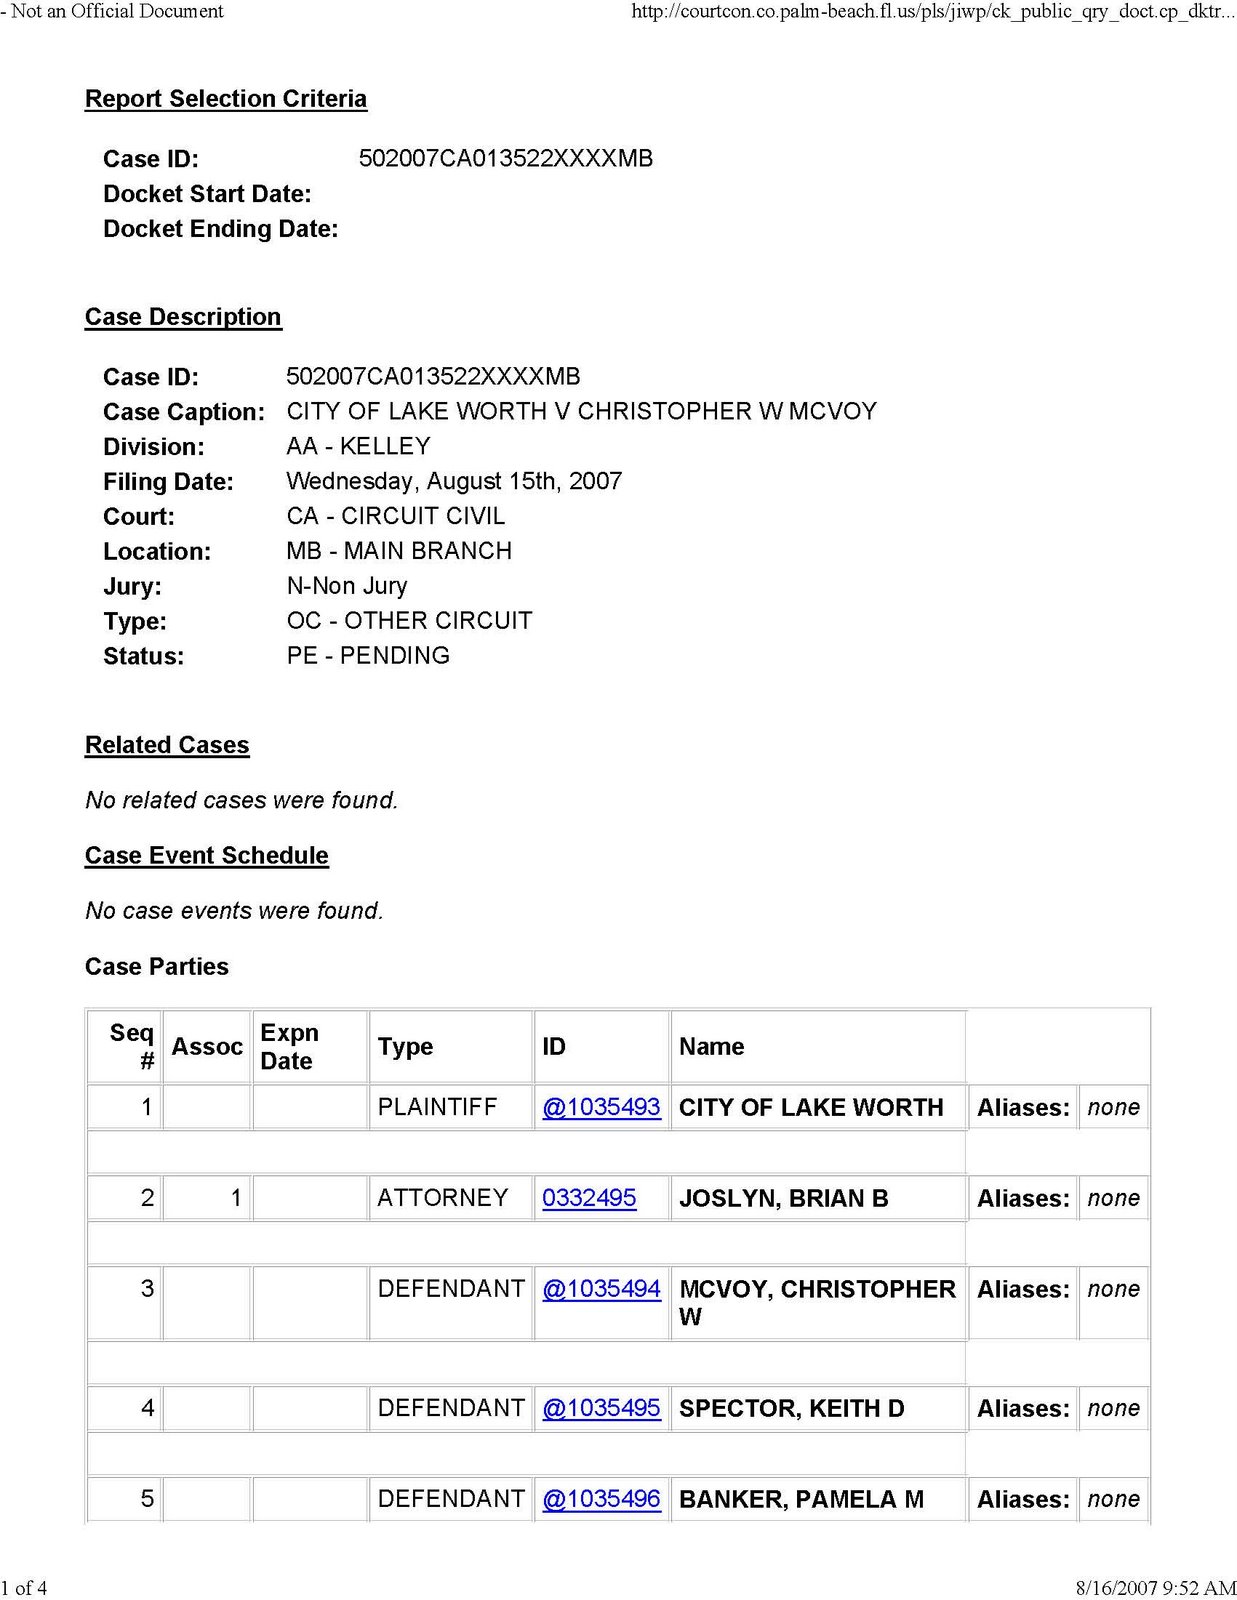 [Docket+Report+Search+Results+(DRR)+-+Not+an+Official+Document_Page_1.jpg]